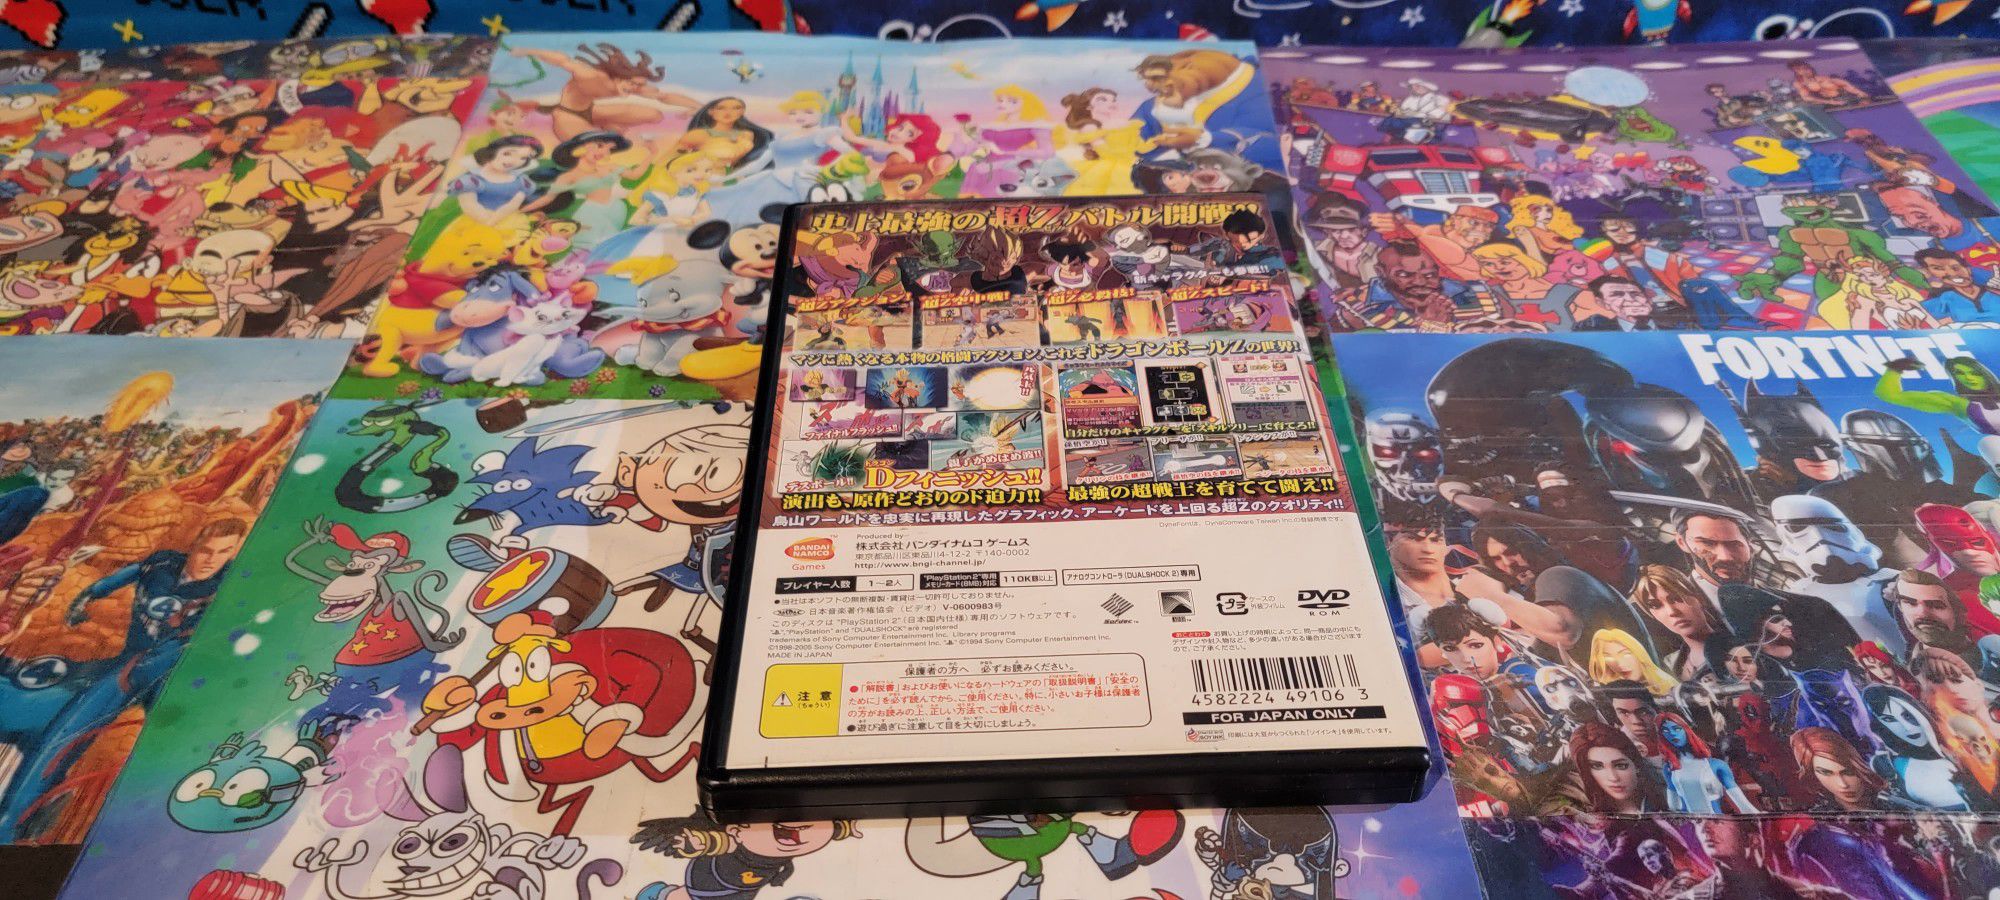 Dragon Ball Z Sagas on PS2 Japan Cover *MINT*